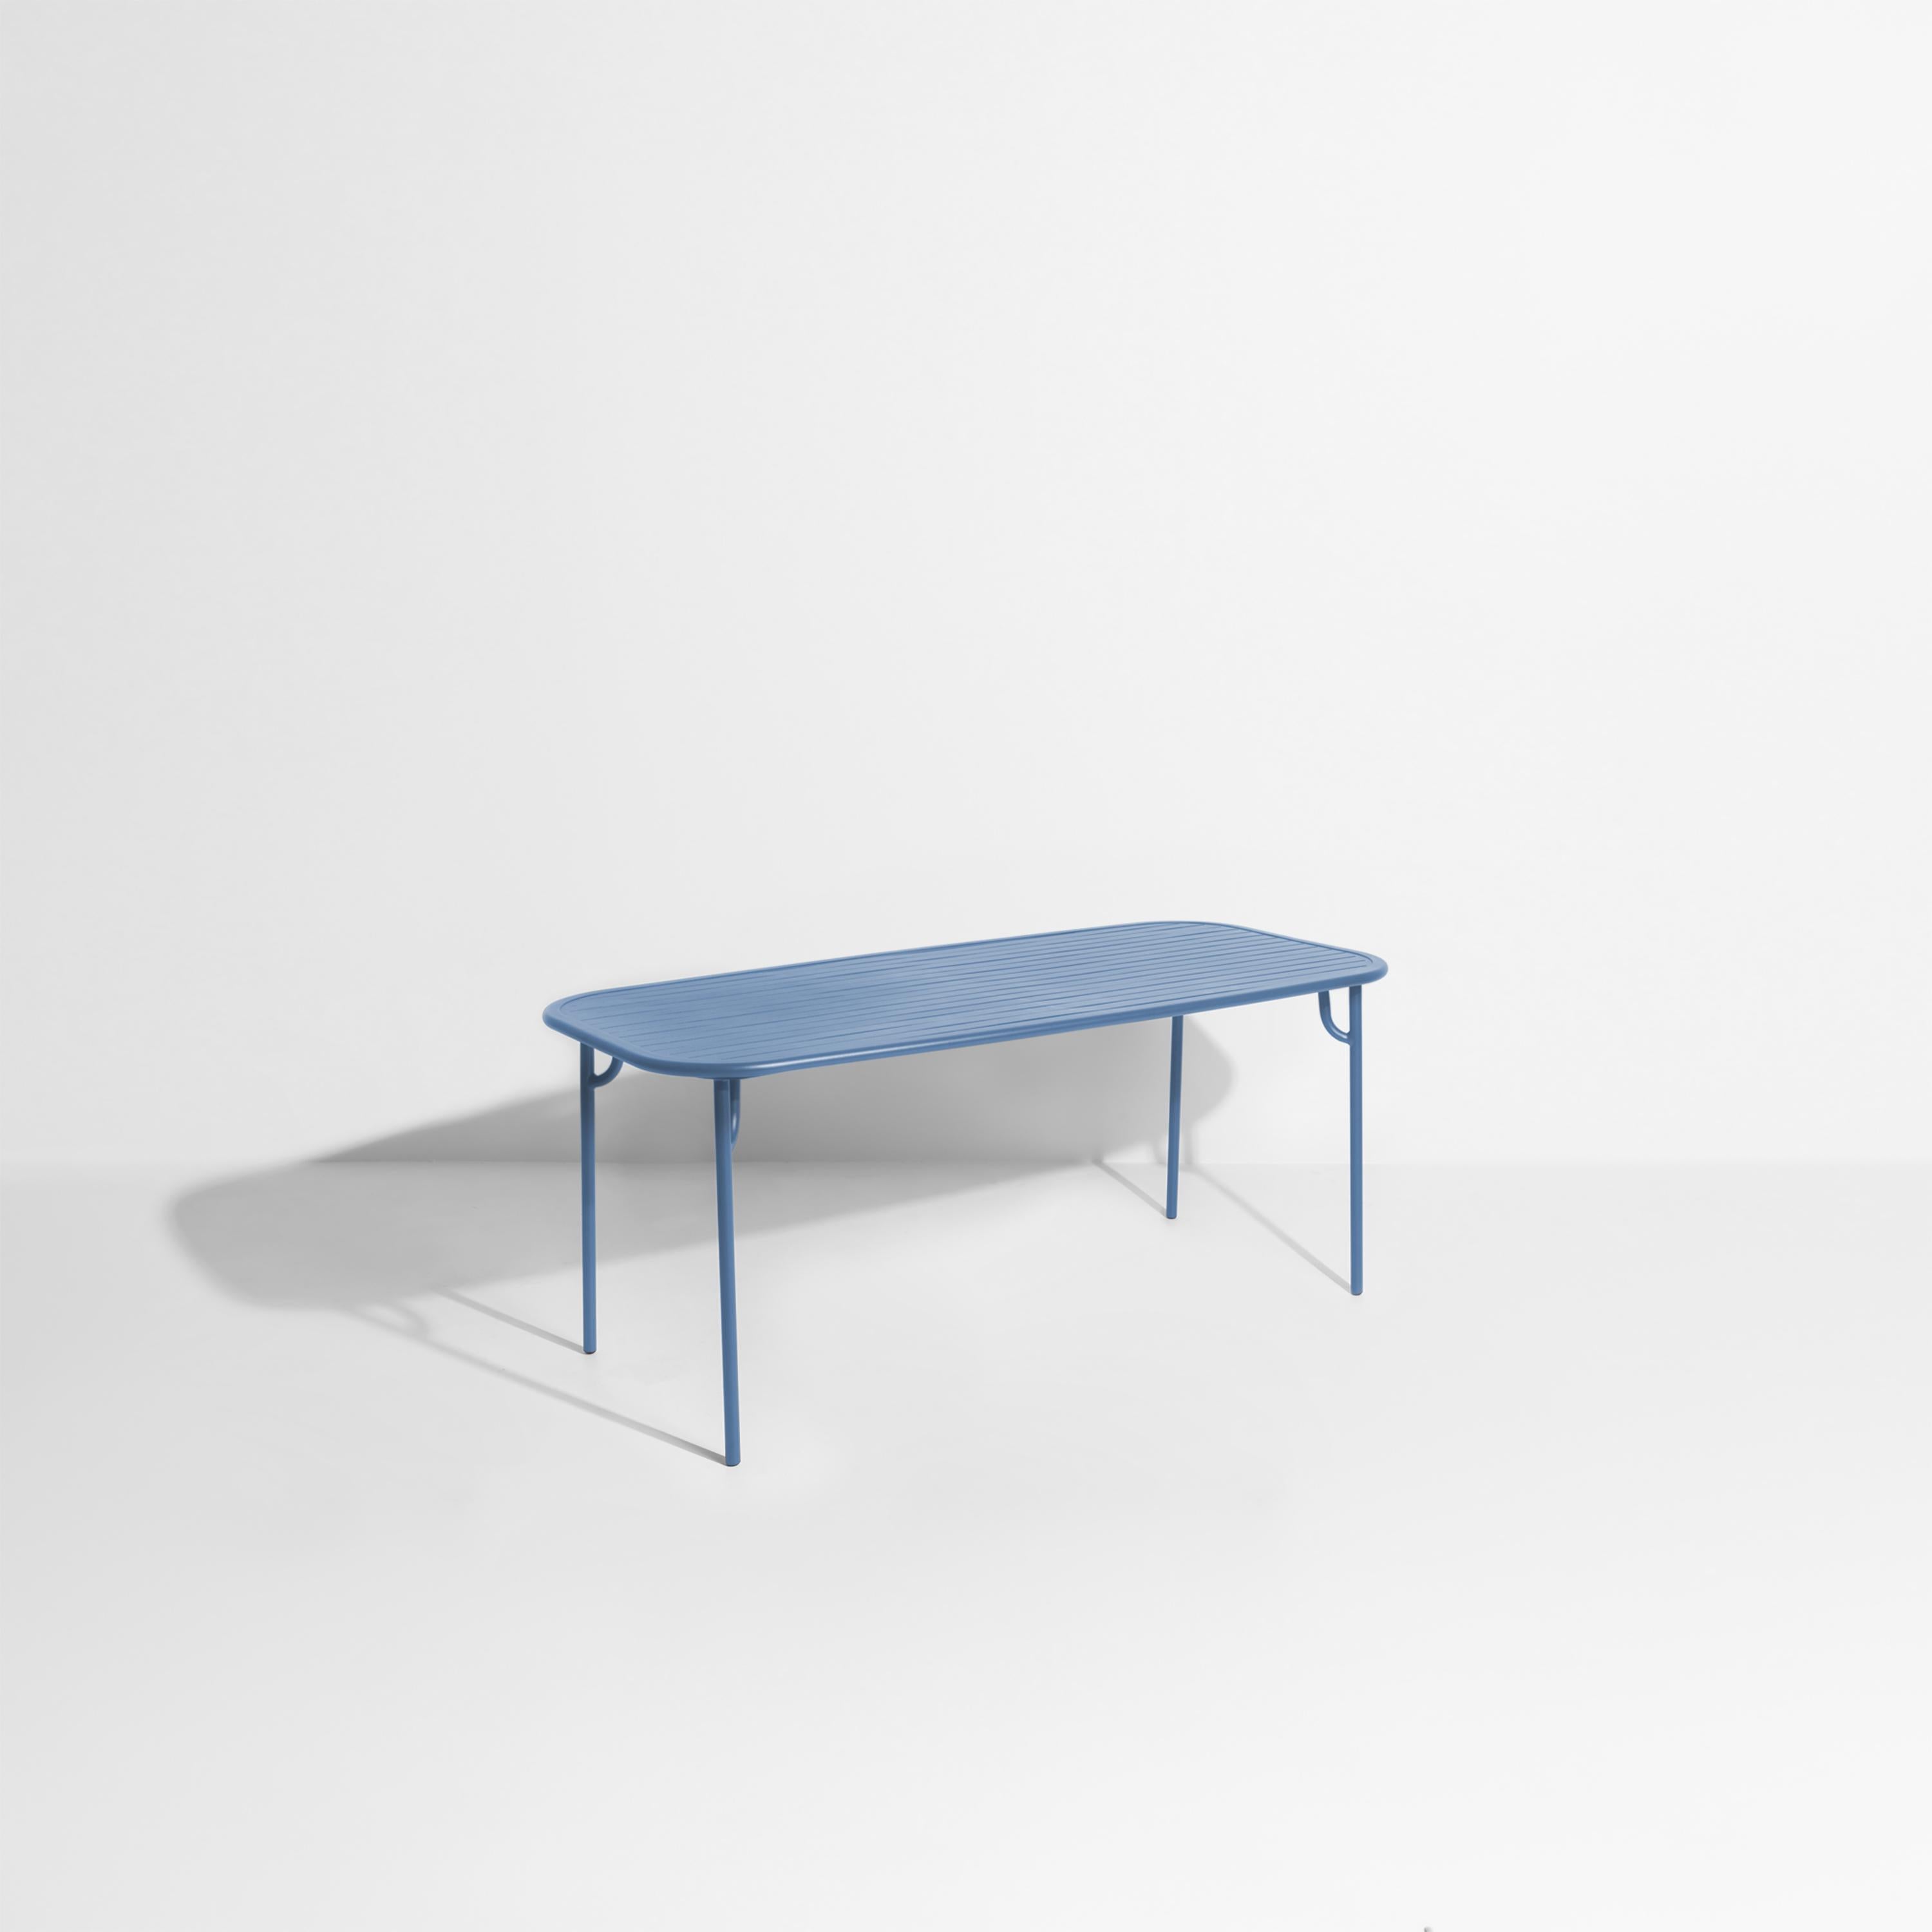 Petite Friture Week-End Medium Rectangular Dining Table in Azur Blue Aluminium with Slats by Studio BrichetZiegler, 2017

The week-end collection is a full range of outdoor furniture, in aluminium grained epoxy paint, matt finish, that includes 18